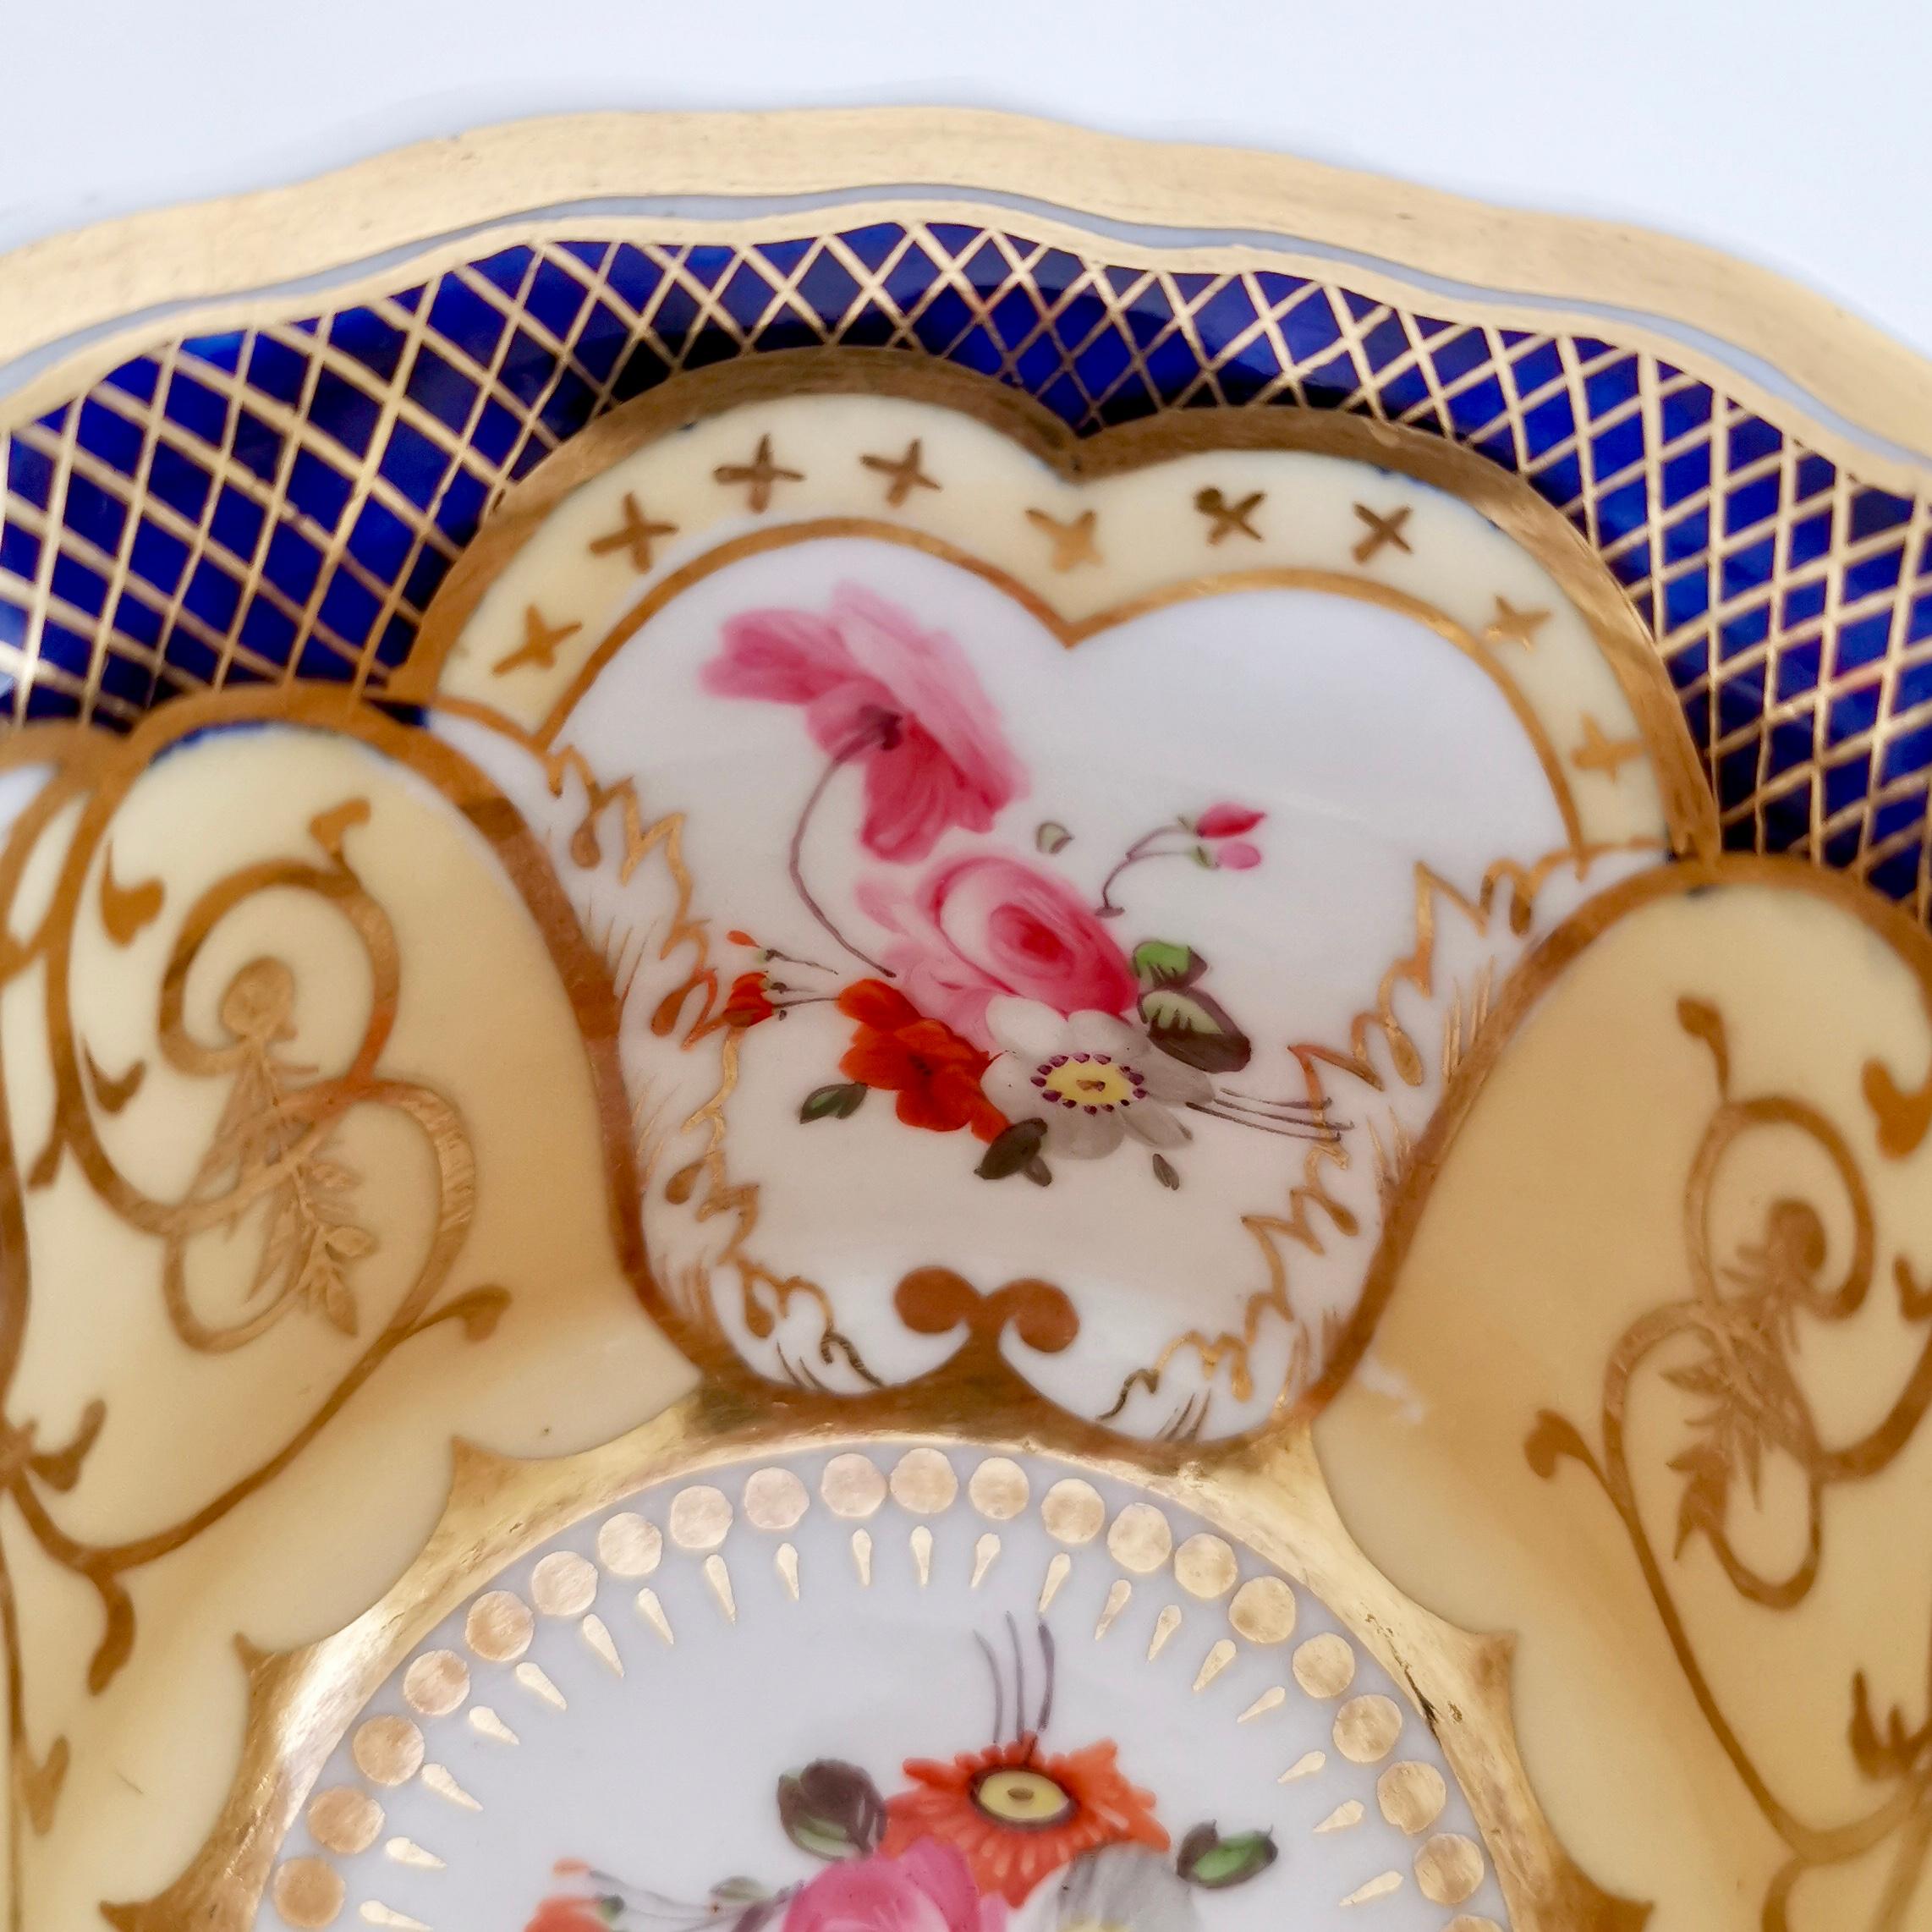 Hand-Painted Yates Coffee Cup, Cobalt Blue, Gilt and Flowers, Pattern No. 1033, 1820-1825